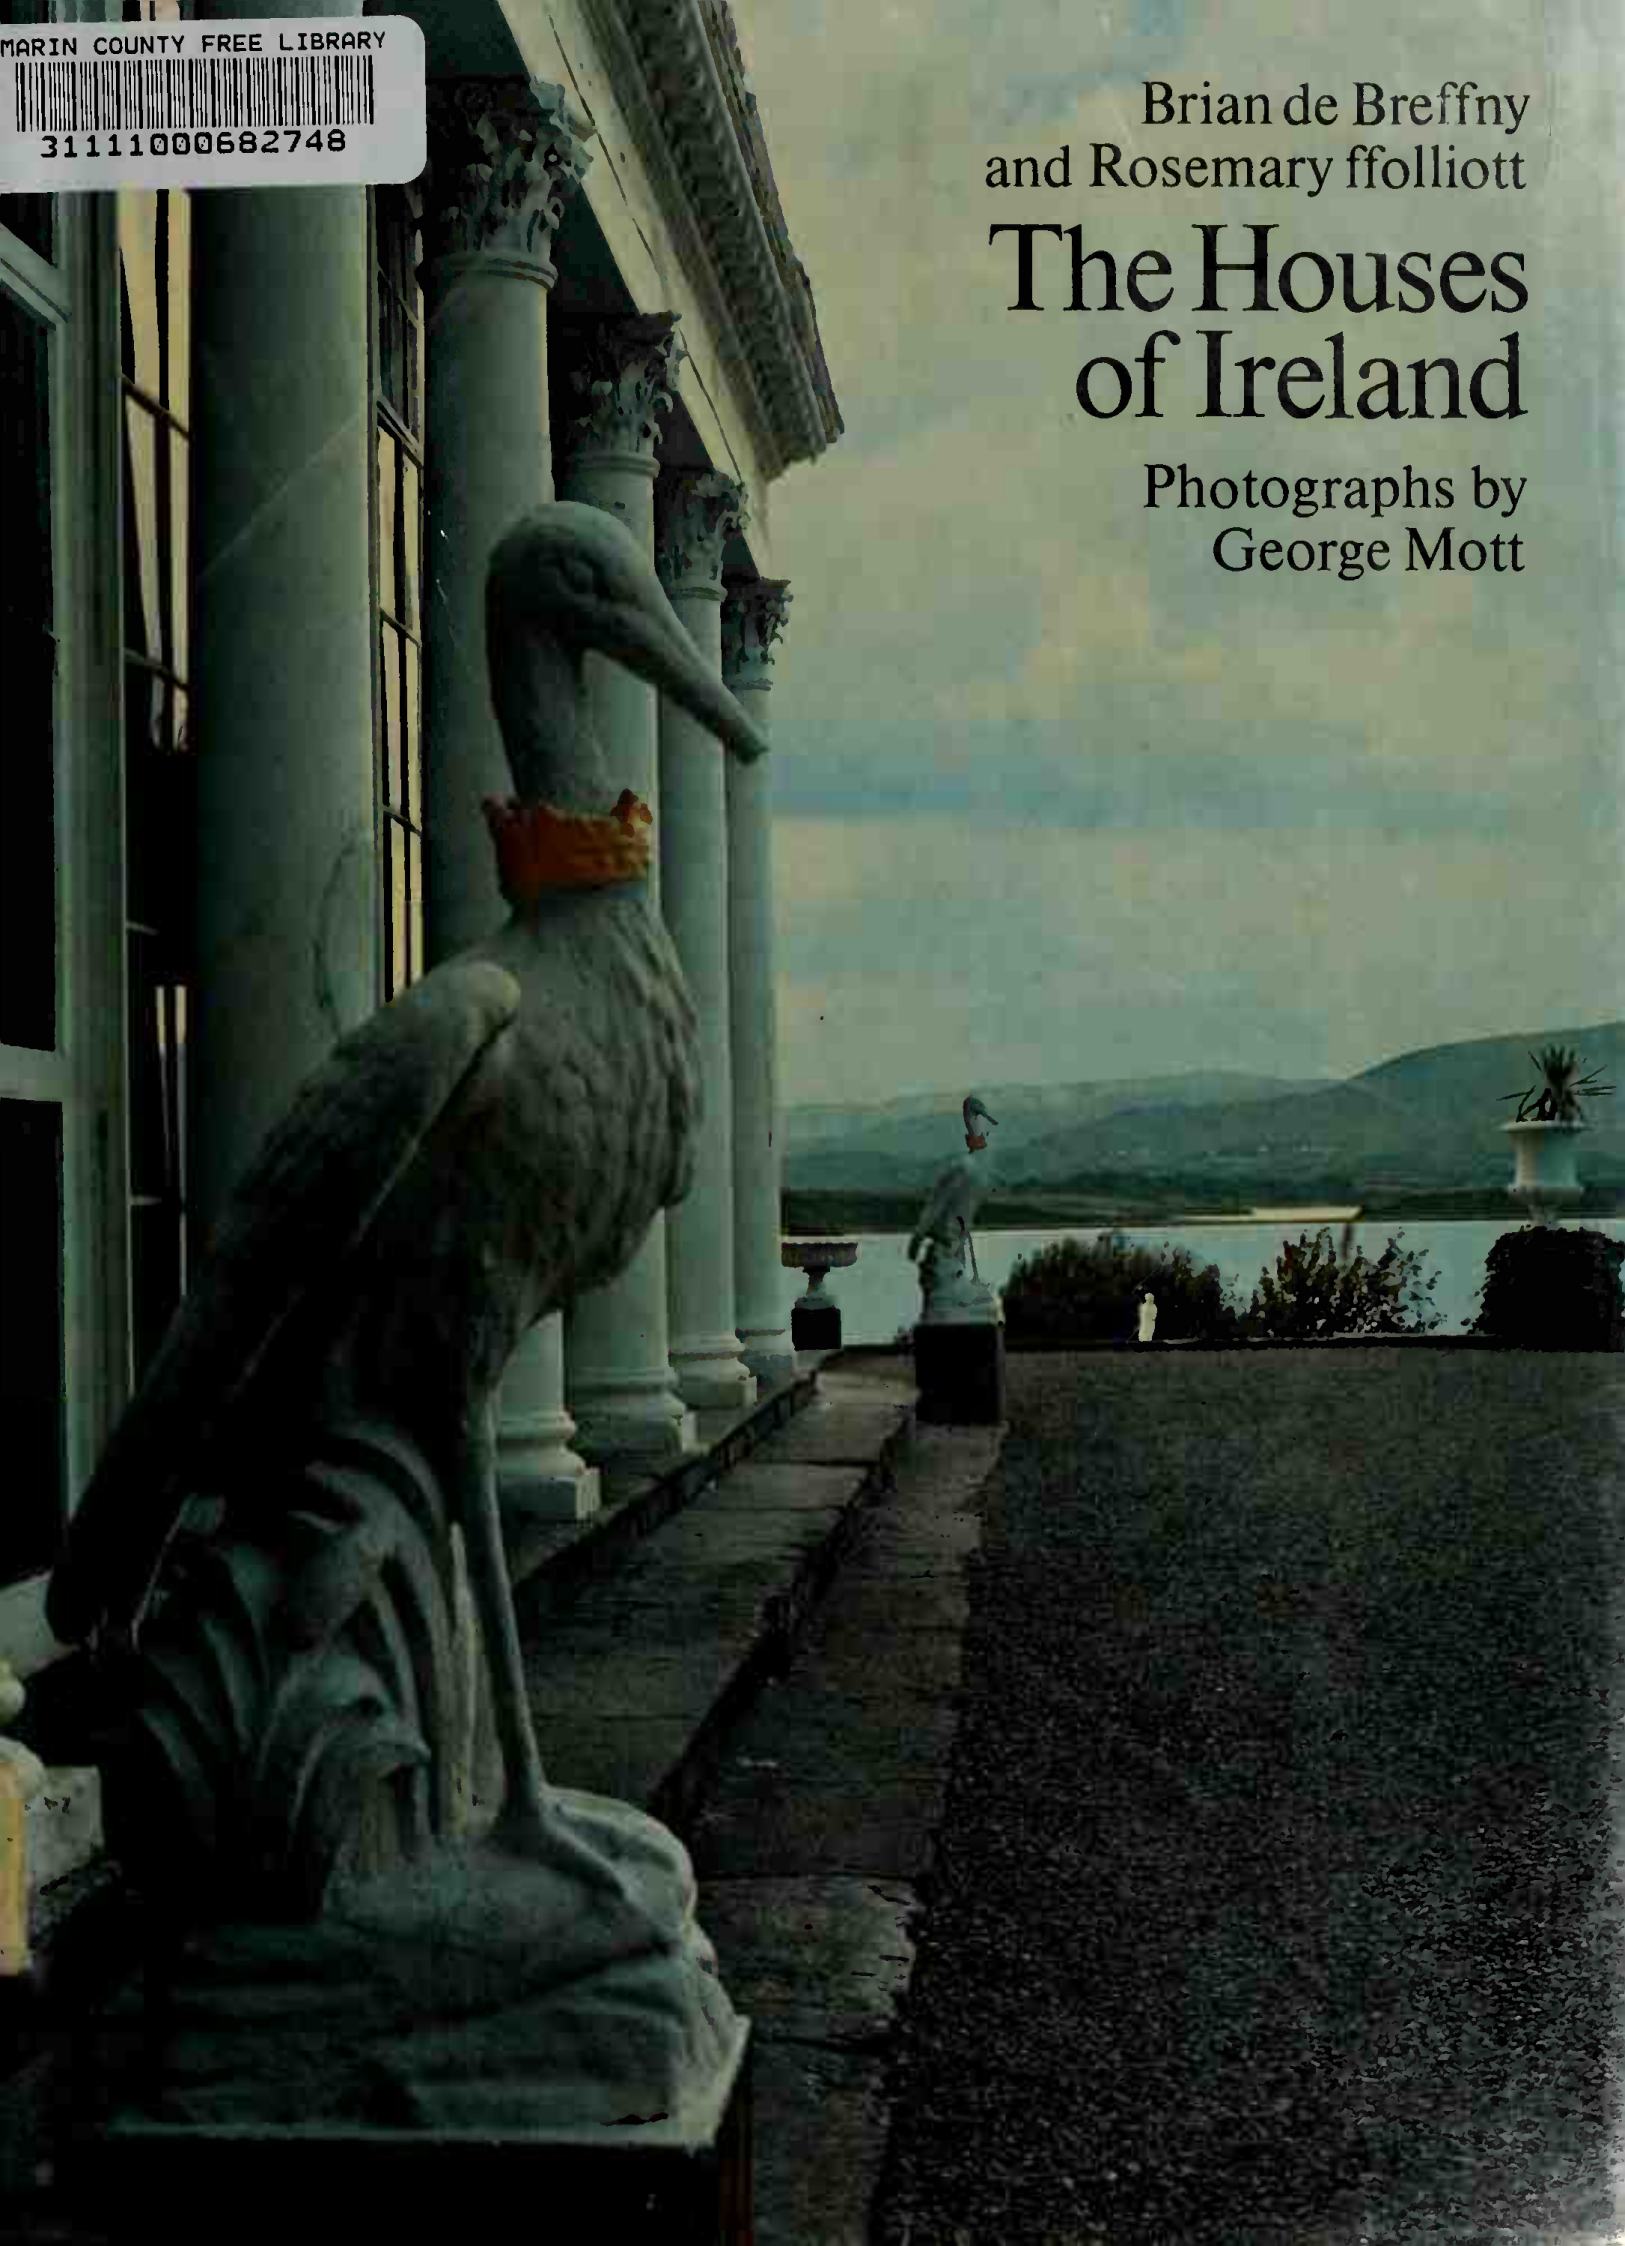 The Houses of Ireland : Domestic architecture from the medieval castle to the Edwardian villa / Brian de Breffny and Rosemary ffolliott ; Photographs by George Mott. — New York : The Viking Press, 1975